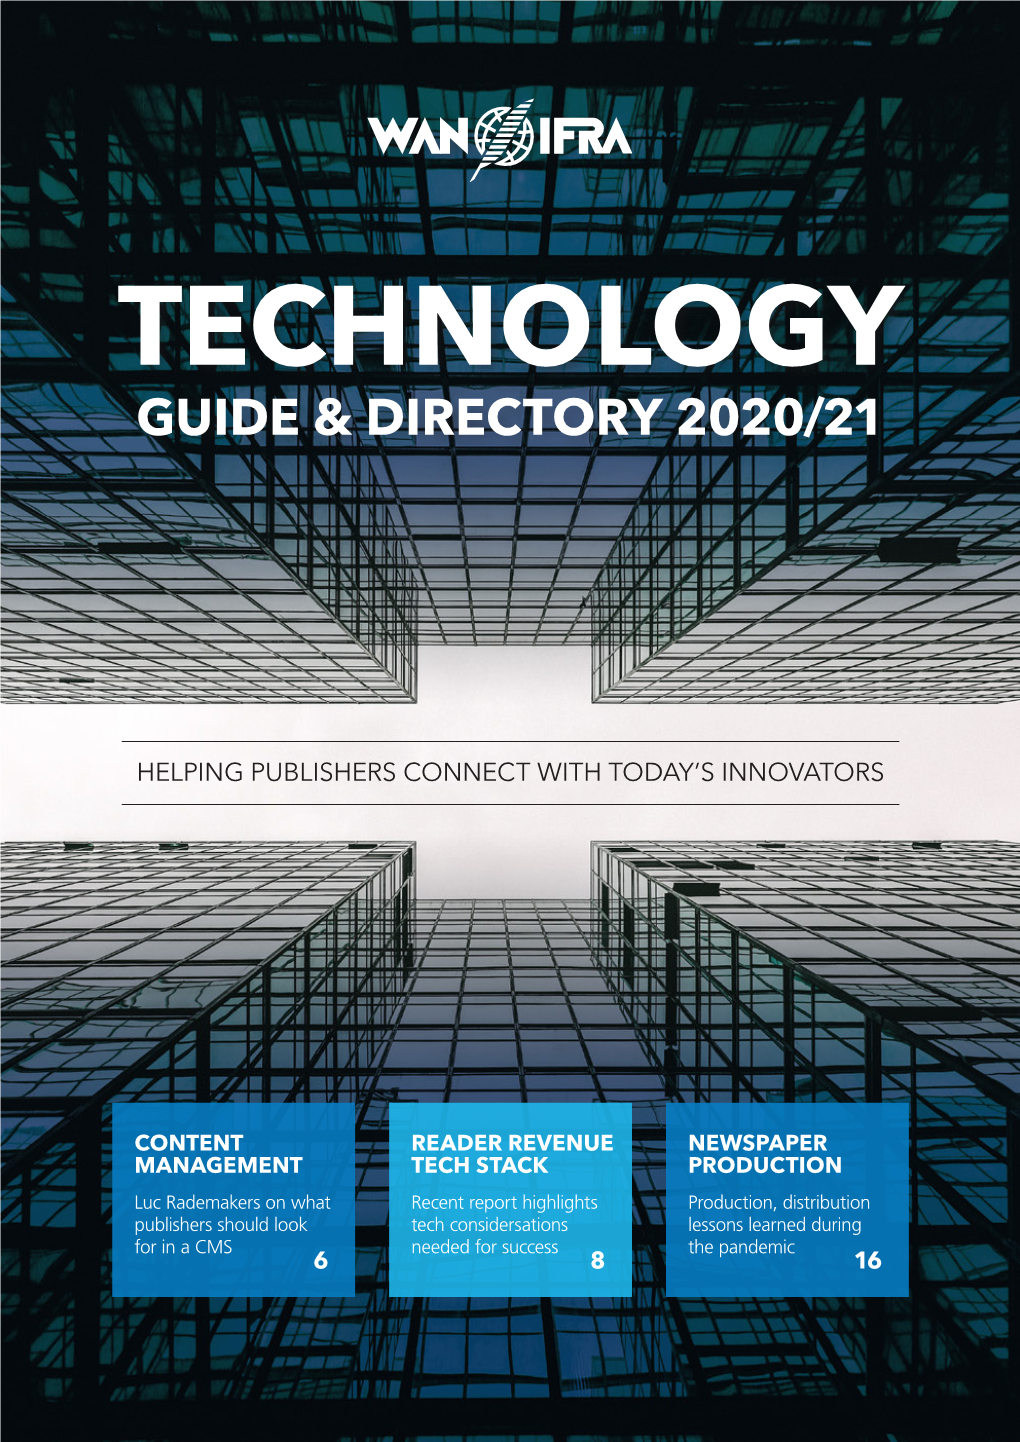 Technology Guide & Directory 2020/21